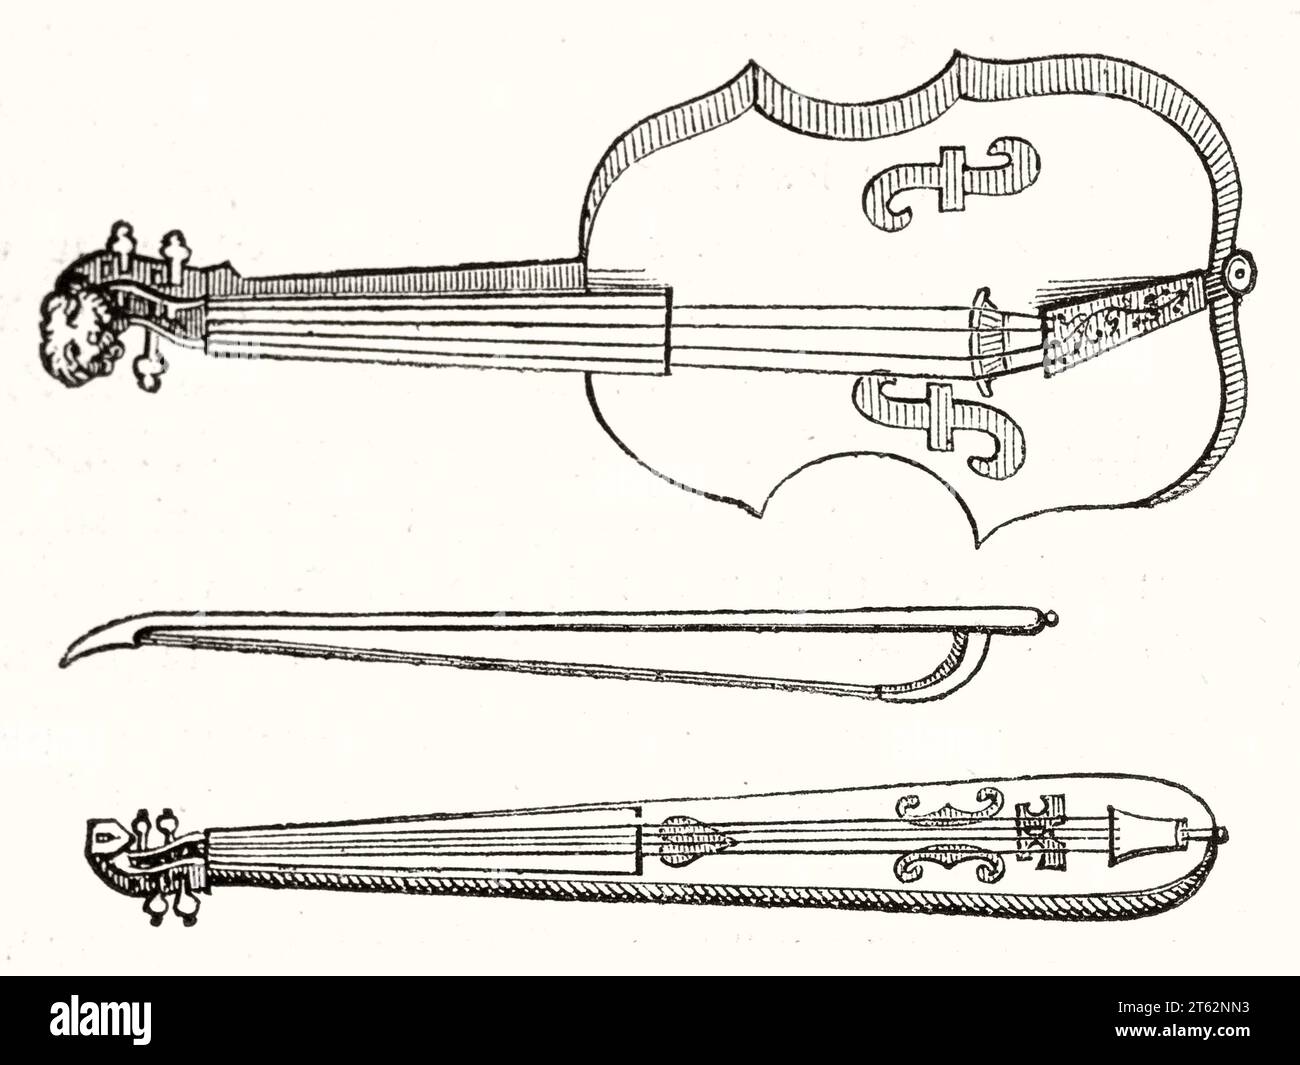 Old illustration of violon, archet and kit violin. After 17th century engraving, publ. on Magasin Pittoresque, Paris, 1849 Stock Photo